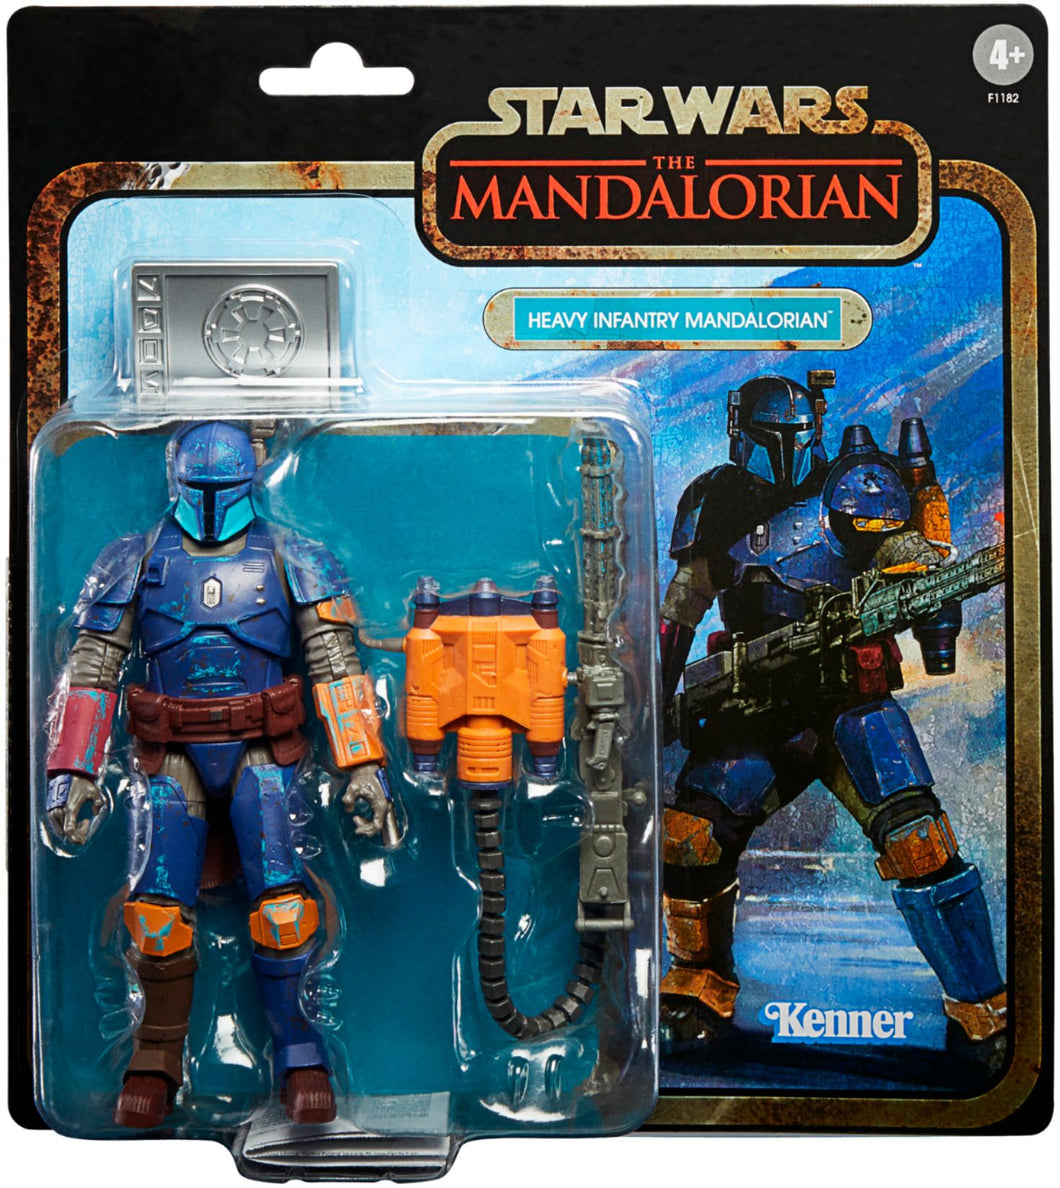 Heavy Infantry Mandalorian - BS6 Credit Collection